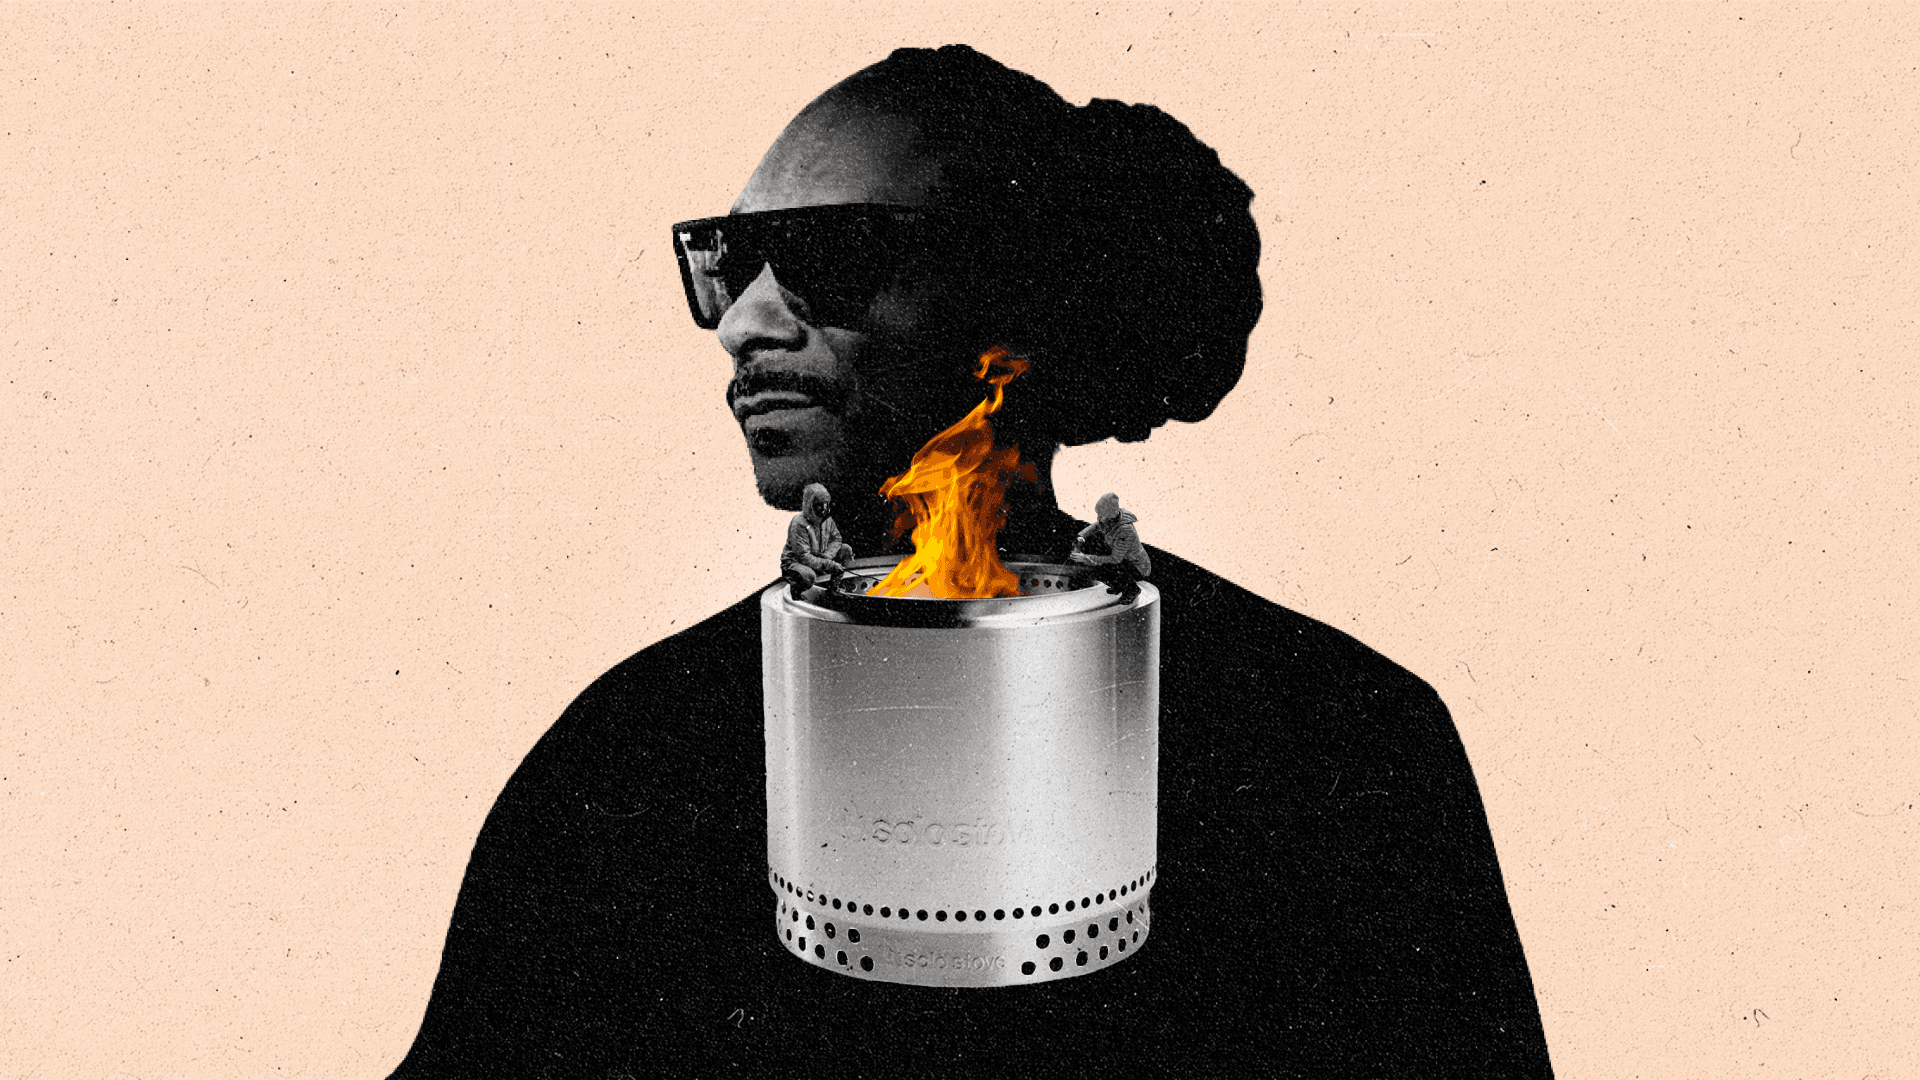 Two people sit beside a stove fire as a silhouette of Snoop Dogg looms in the background.